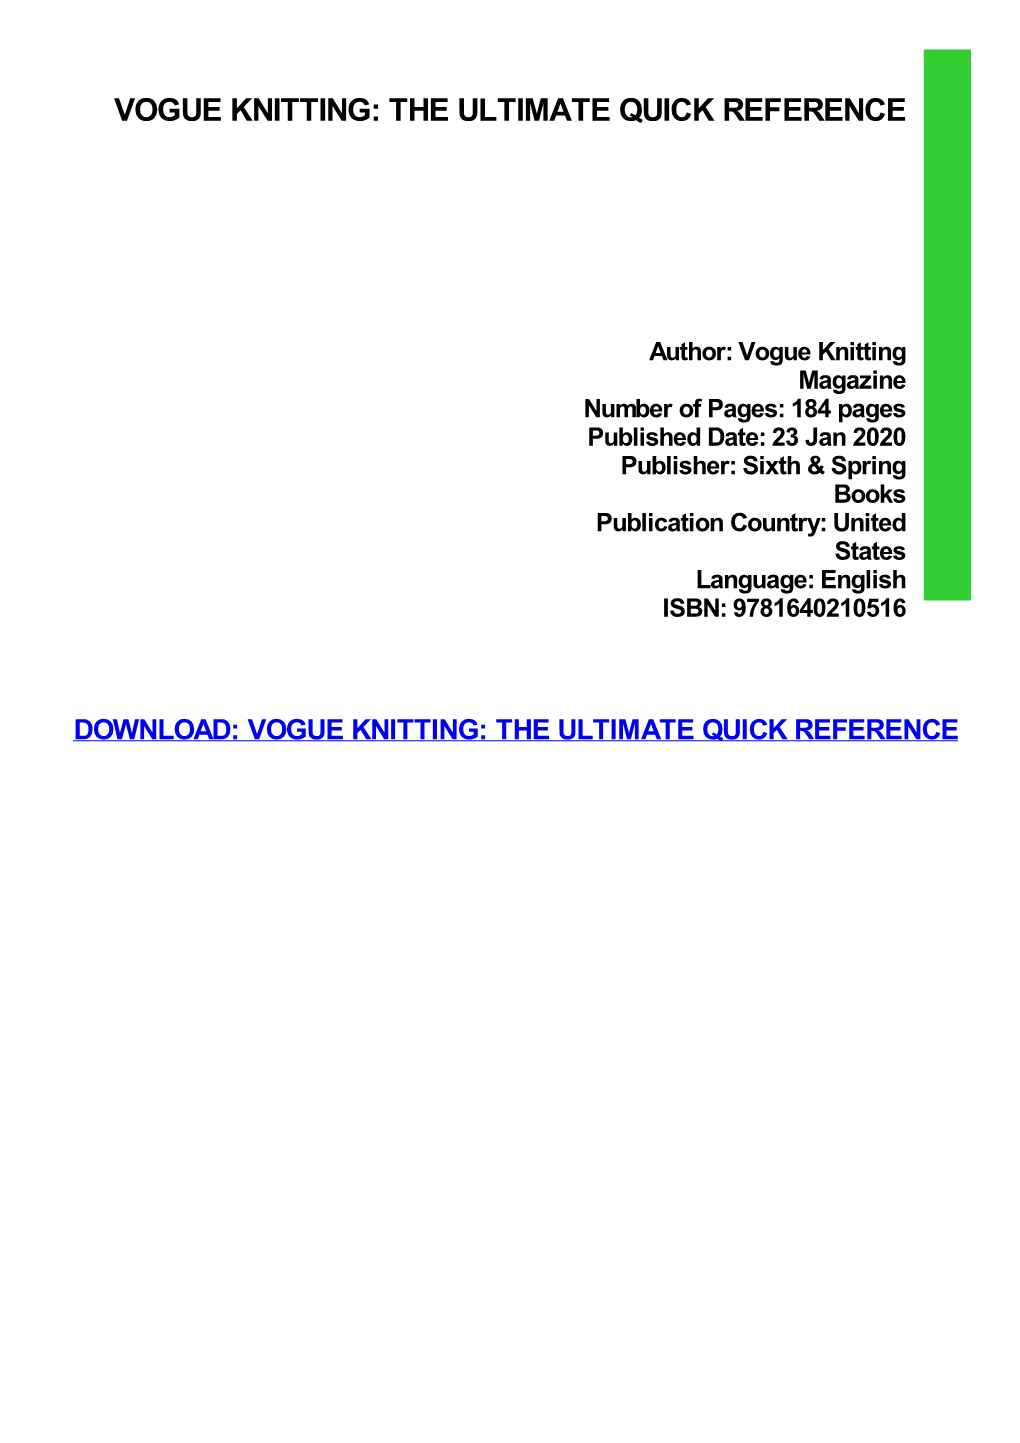 Vogue Knitting: the Ultimate Quick Reference Download Free